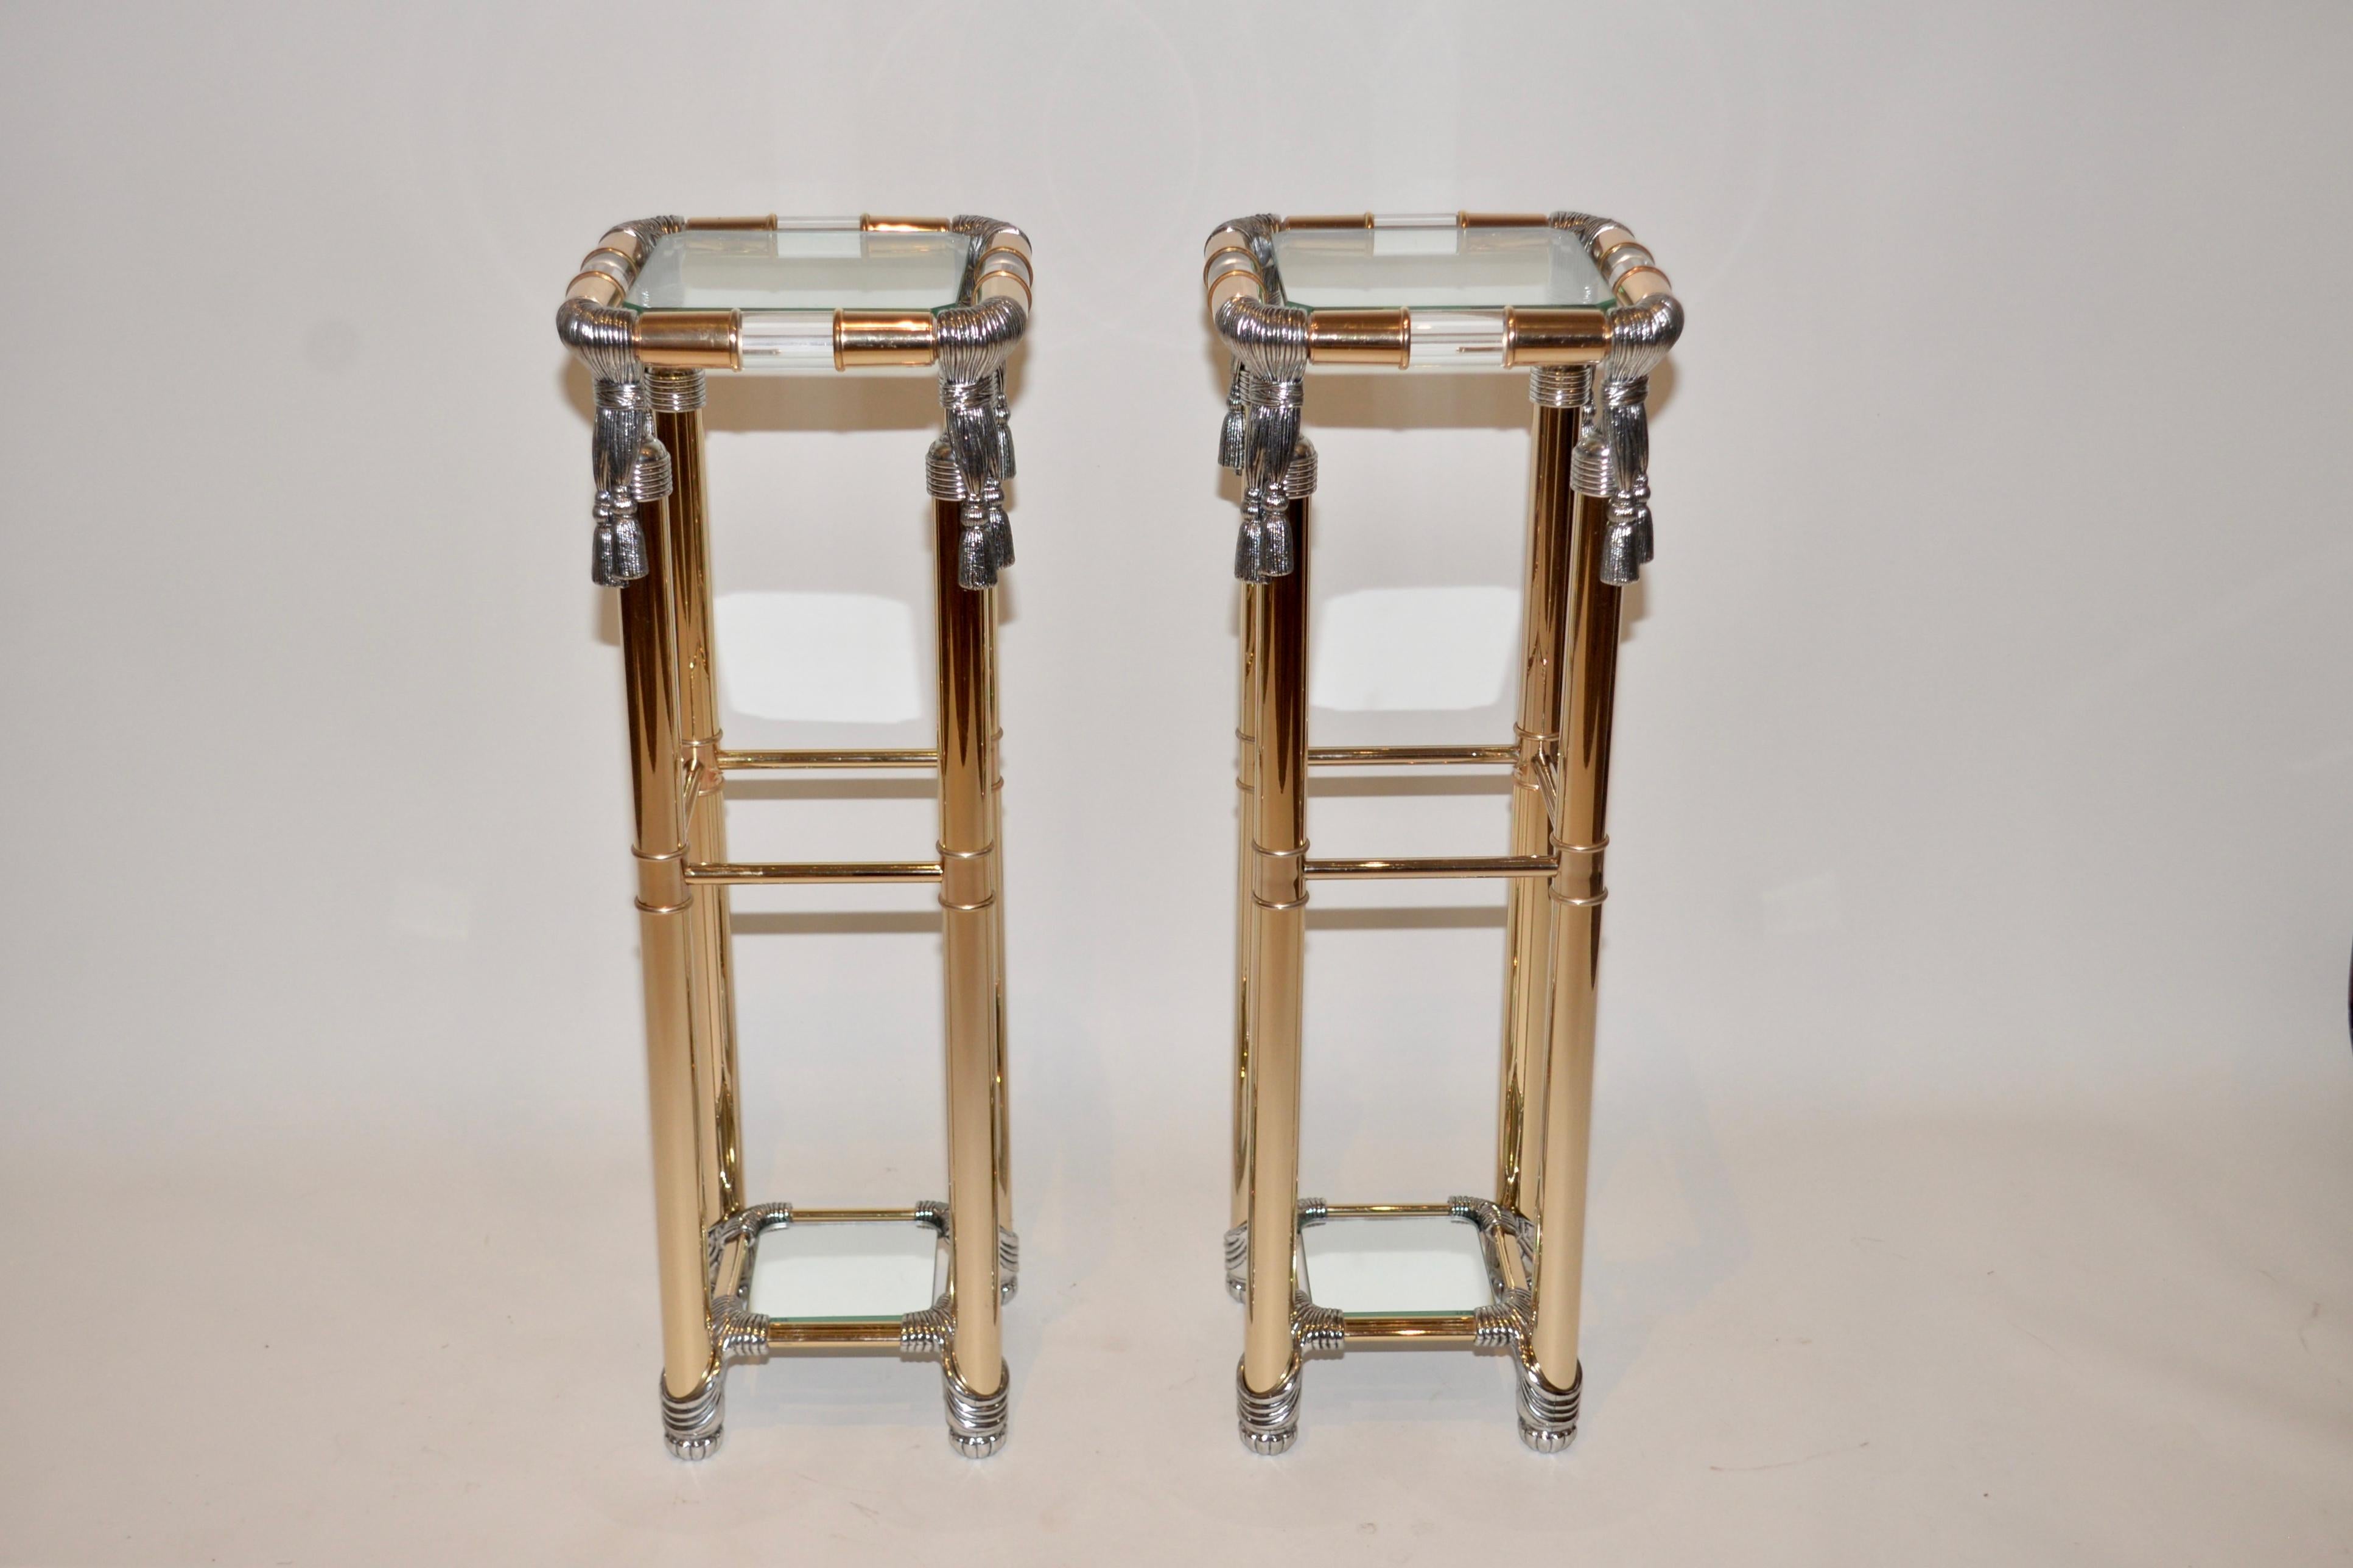 A pair of vintage Curvasa Meubles Hollywood Regency style pedestal stands. Lucite and gold with silver rope detailing on each corner. Very striking items.